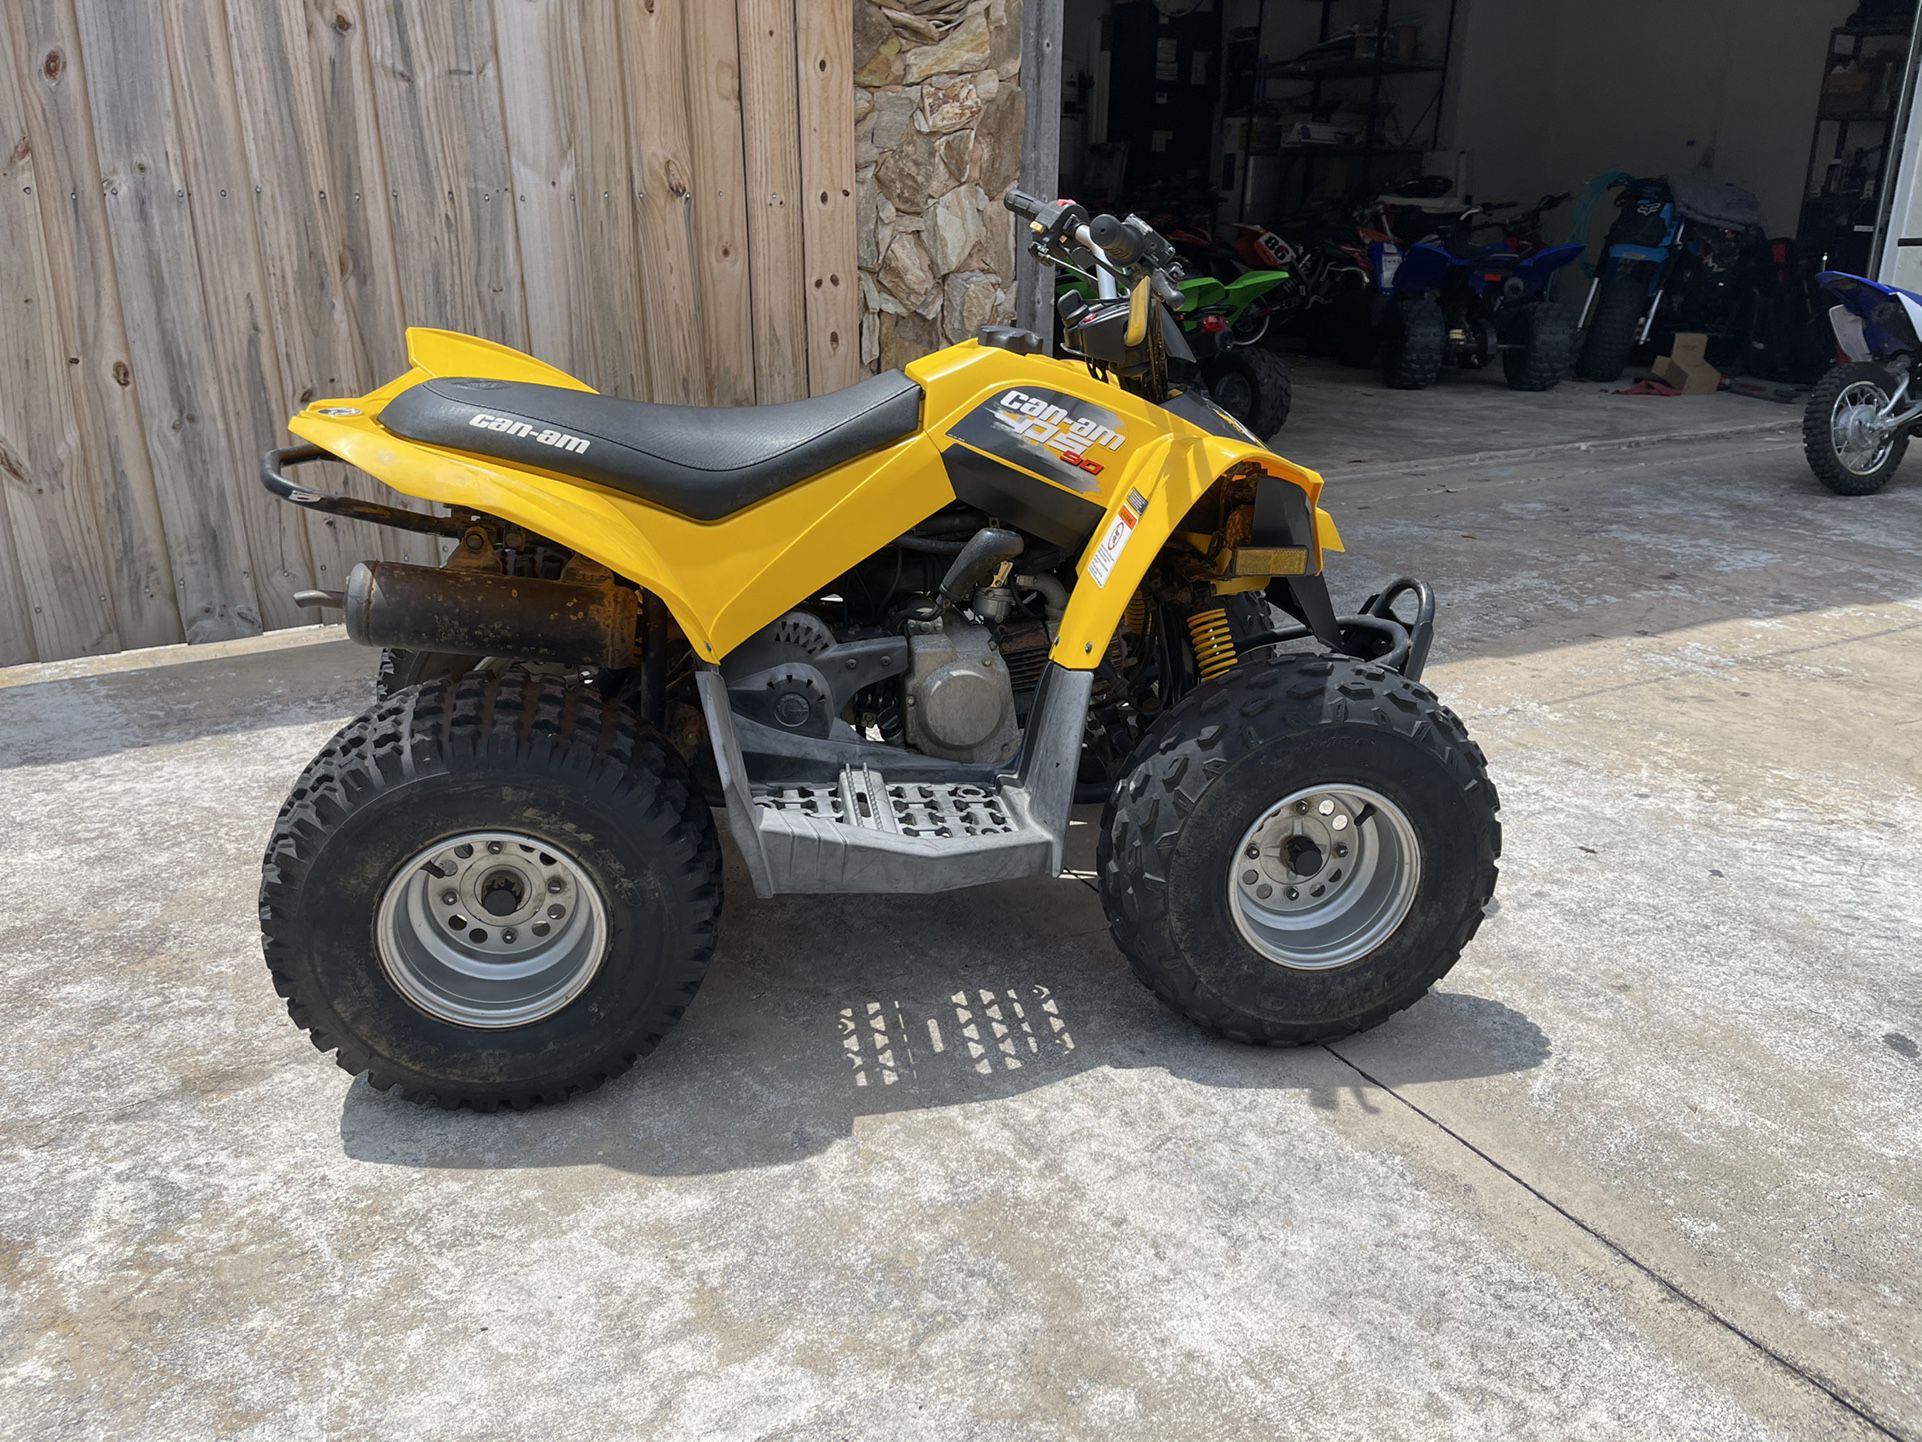 Photo CanAm DX 90 I BUY SELL TRADE DIRT BIKES ATVs